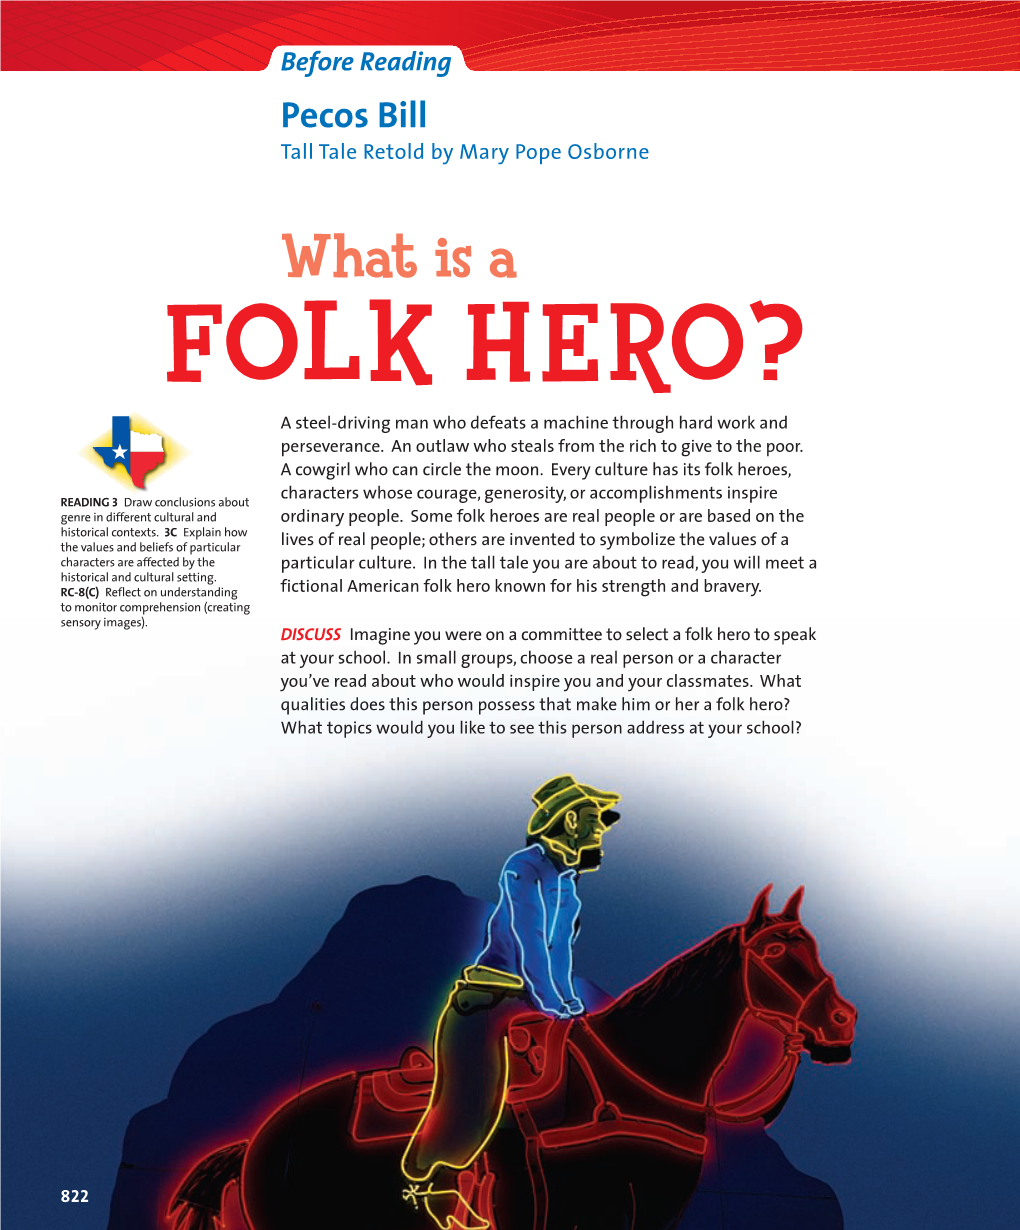 FOLK HERO? a Steel-Driving Man Who Defeats a Machine Through Hard Work and Perseverance